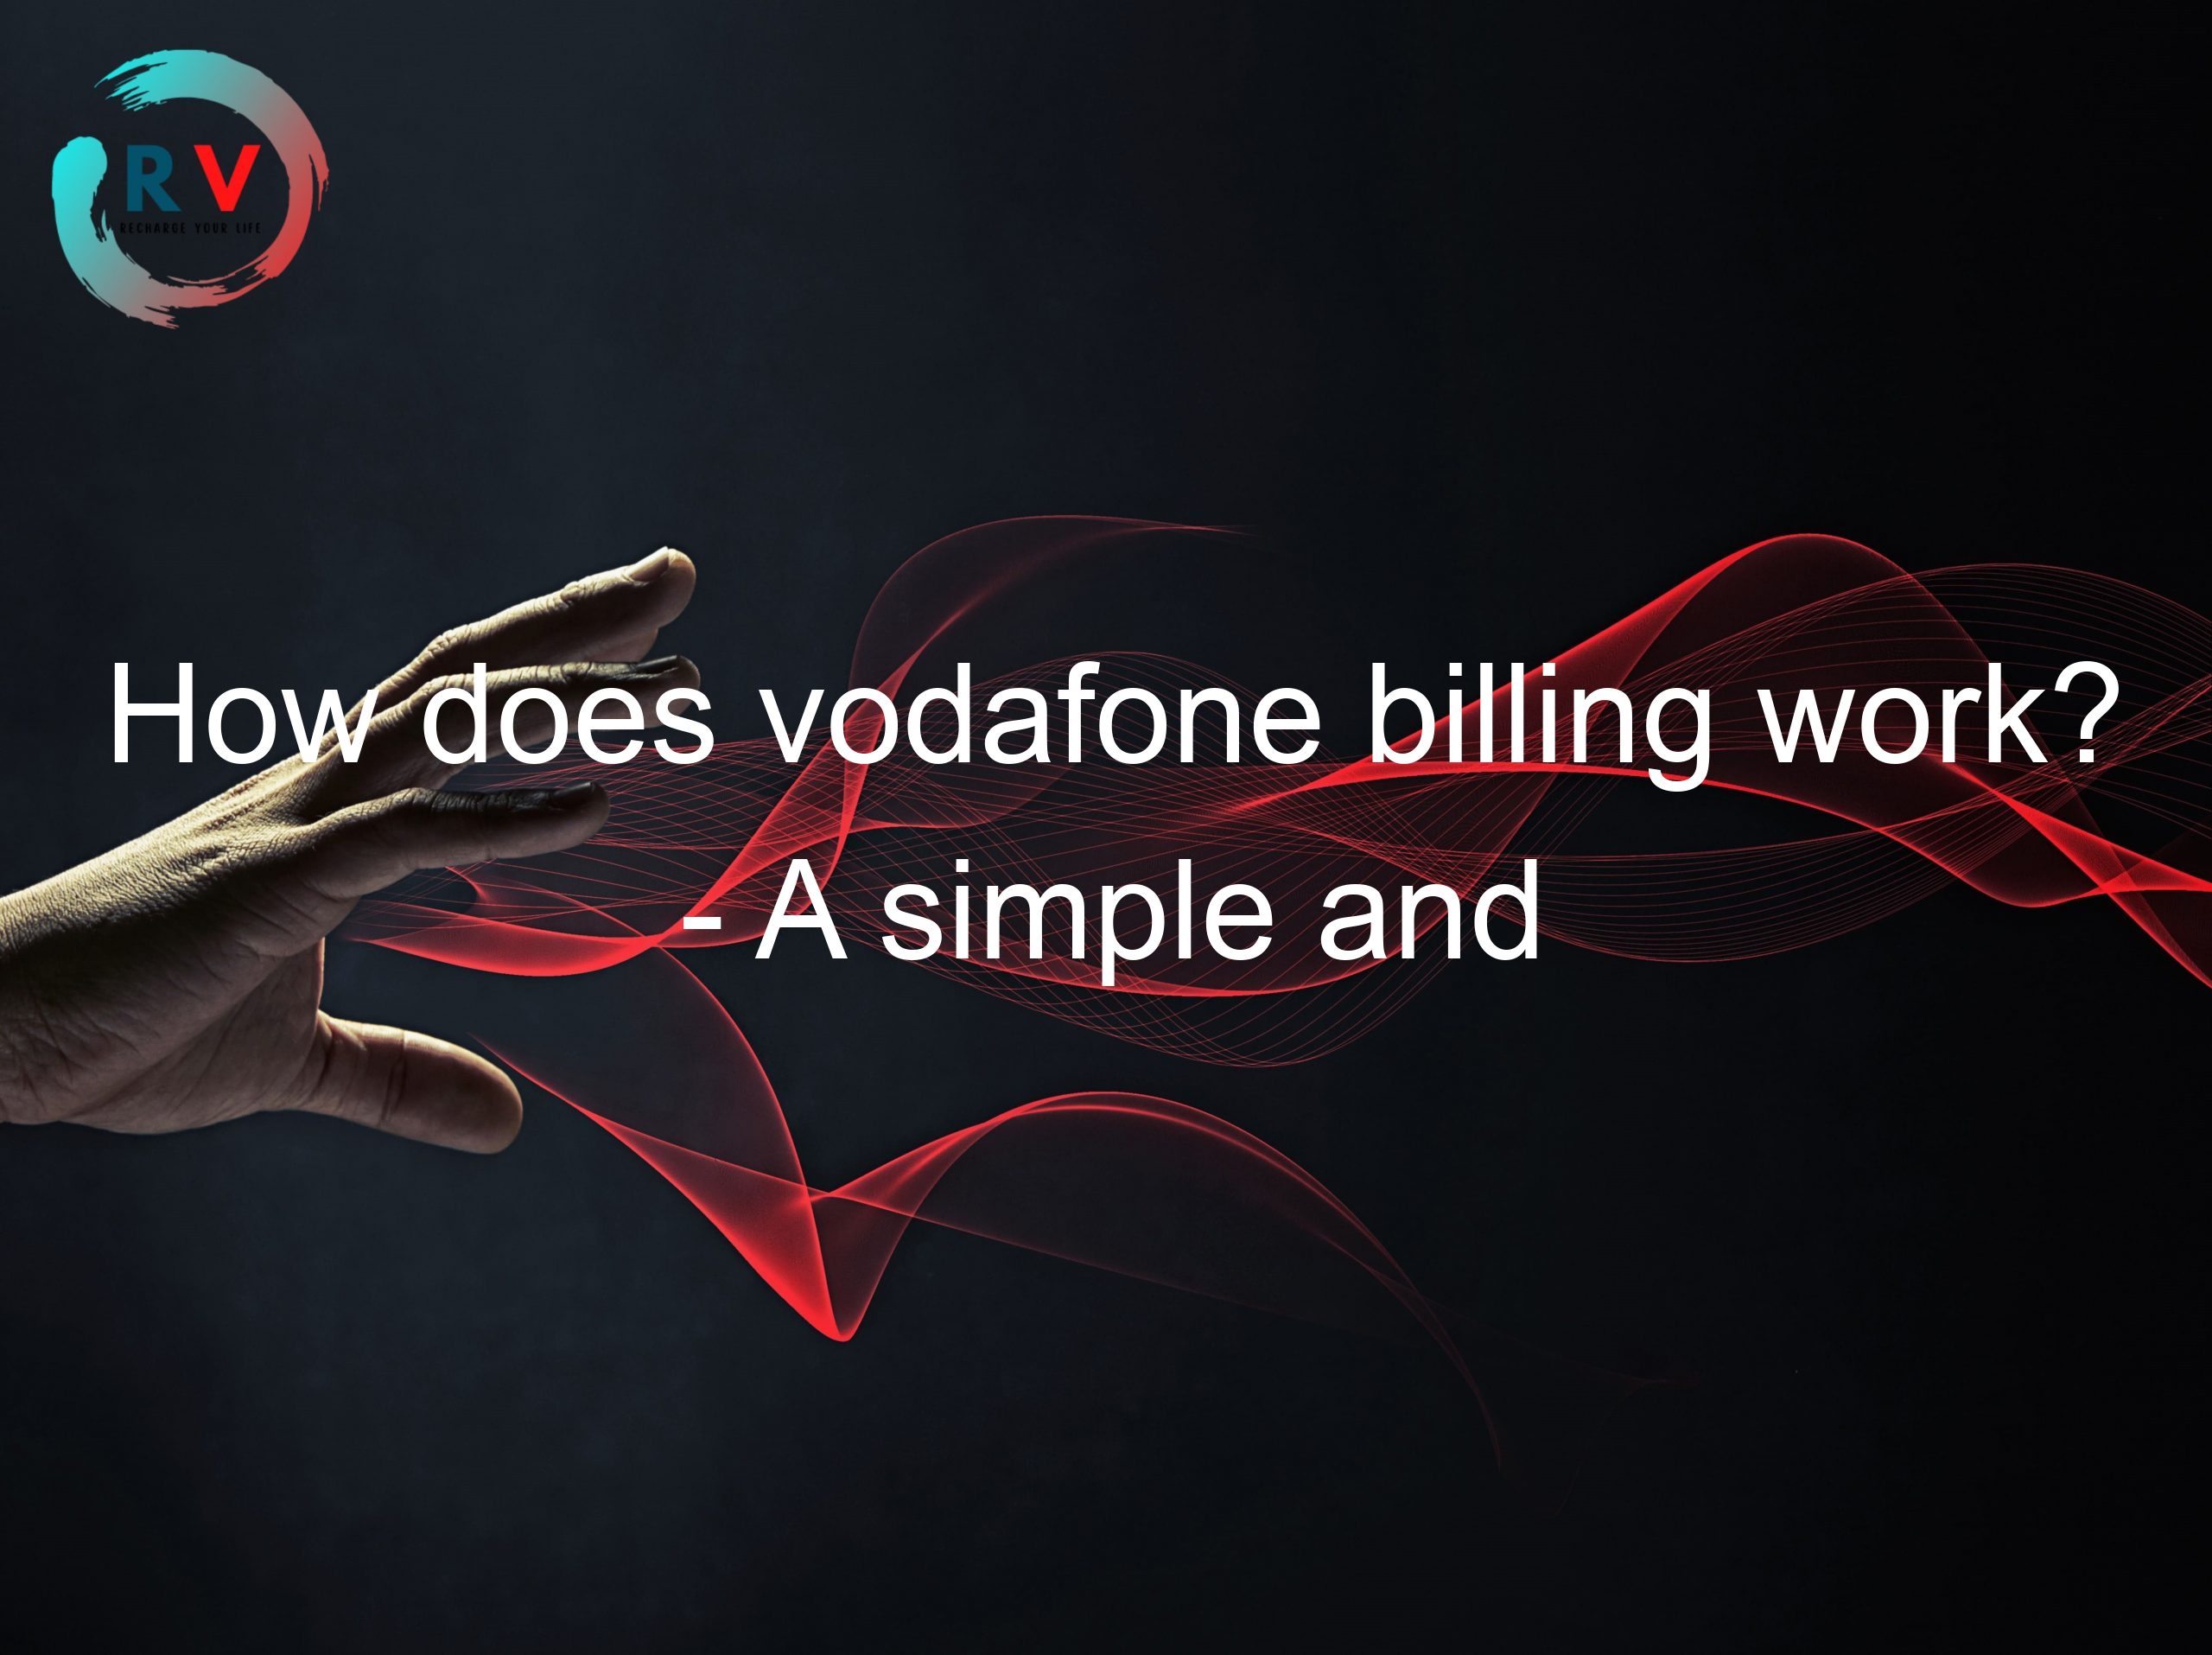 How does vodafone billing work? - A simple and quick guide